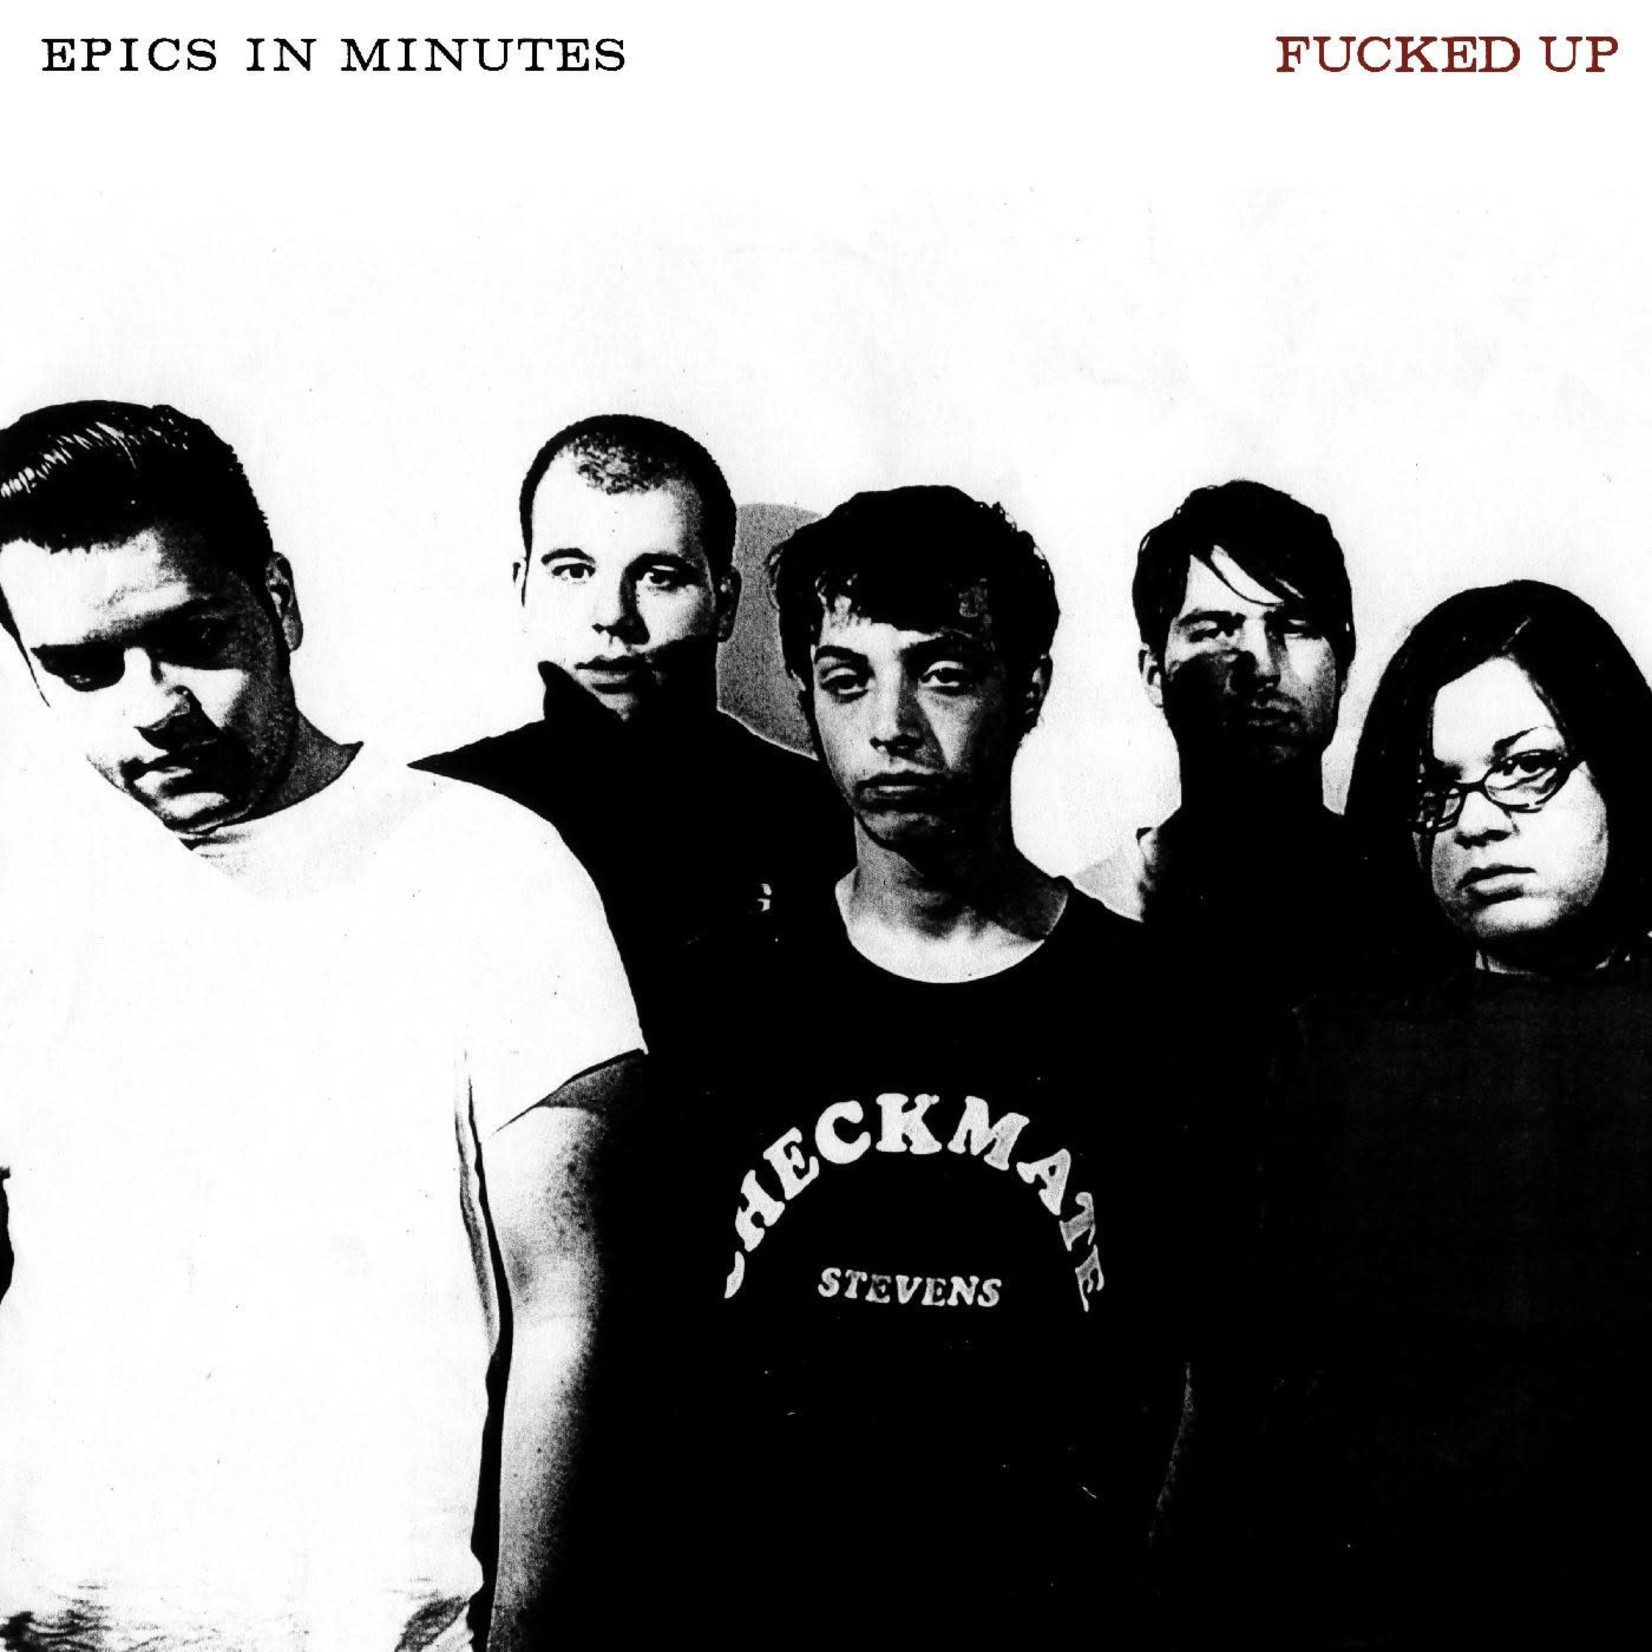 Fucked Up - Epics In Minutes [CD]